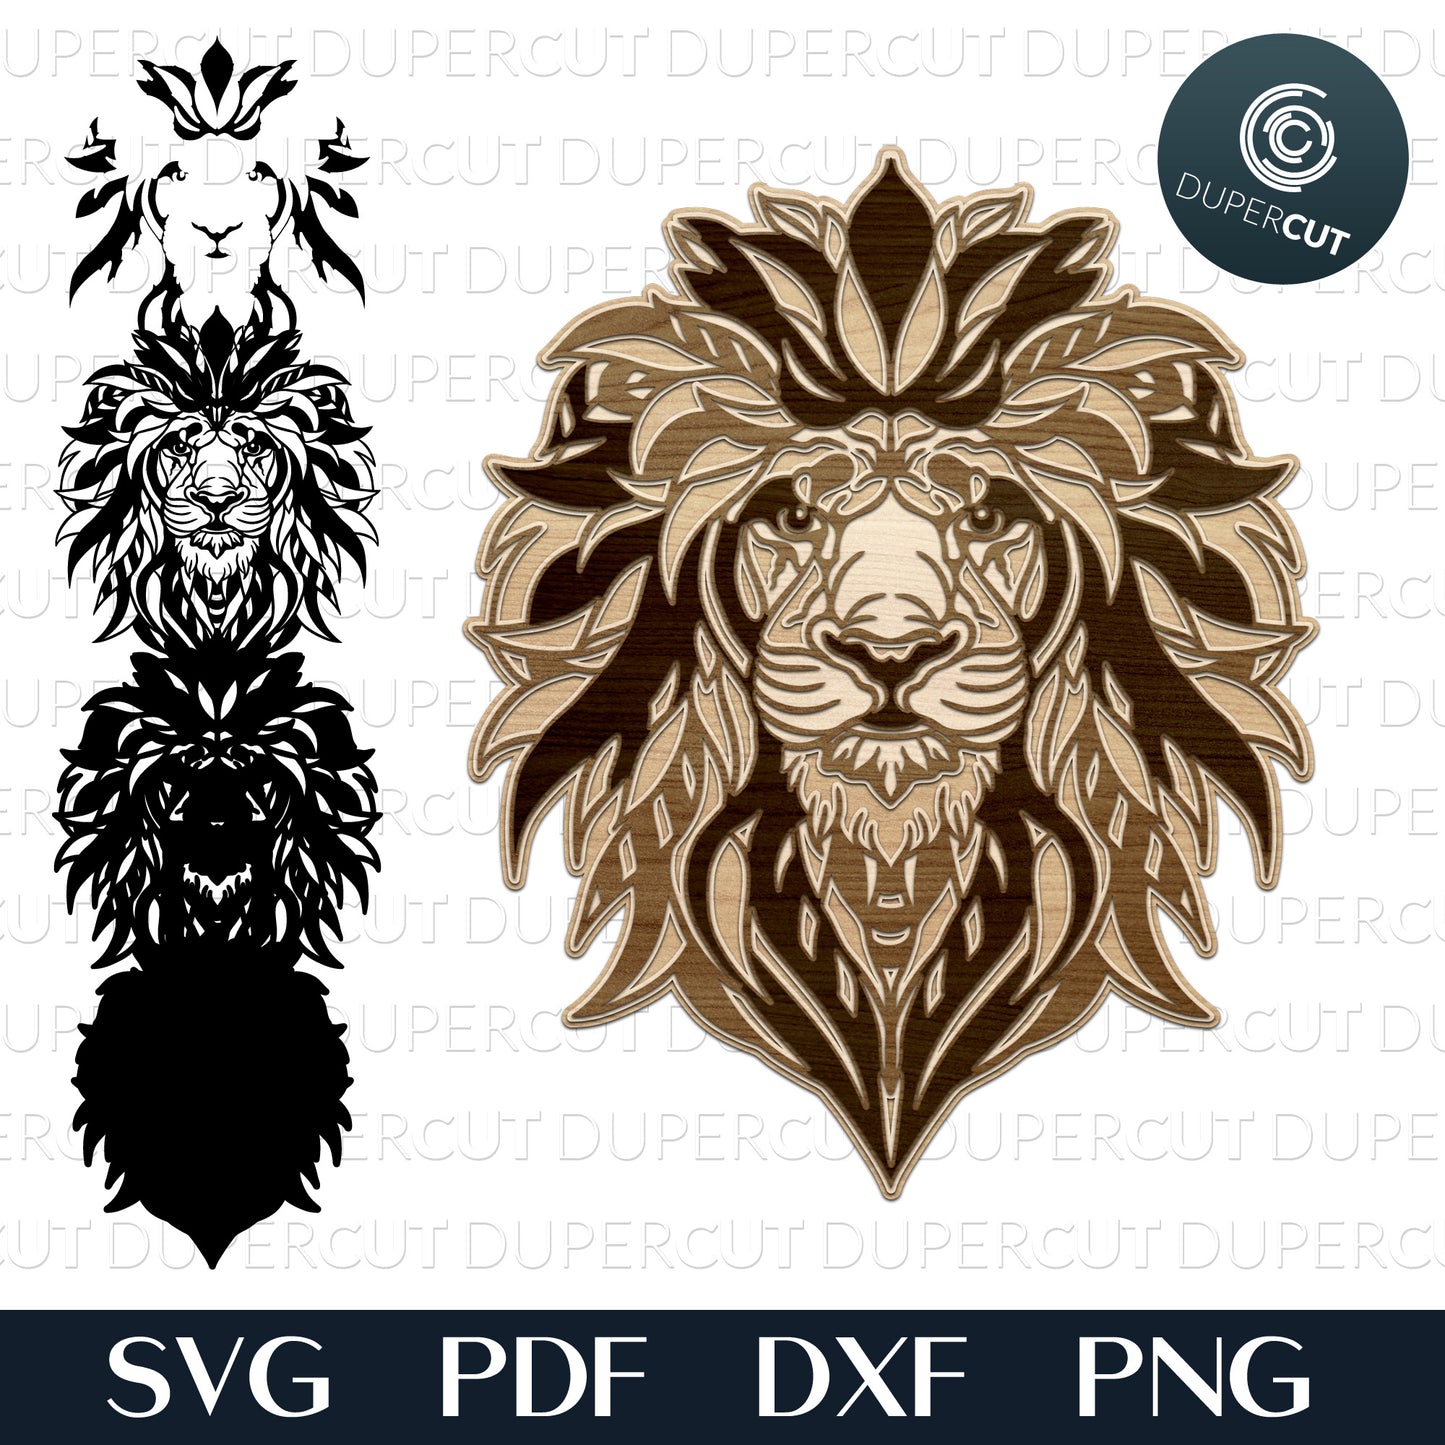 Lion multi-layered files, SVG PNG DXF files for cutting, laser engraving, scrapbooking. For use with Cricut, Glowforge, Silhouette, CNC machines.